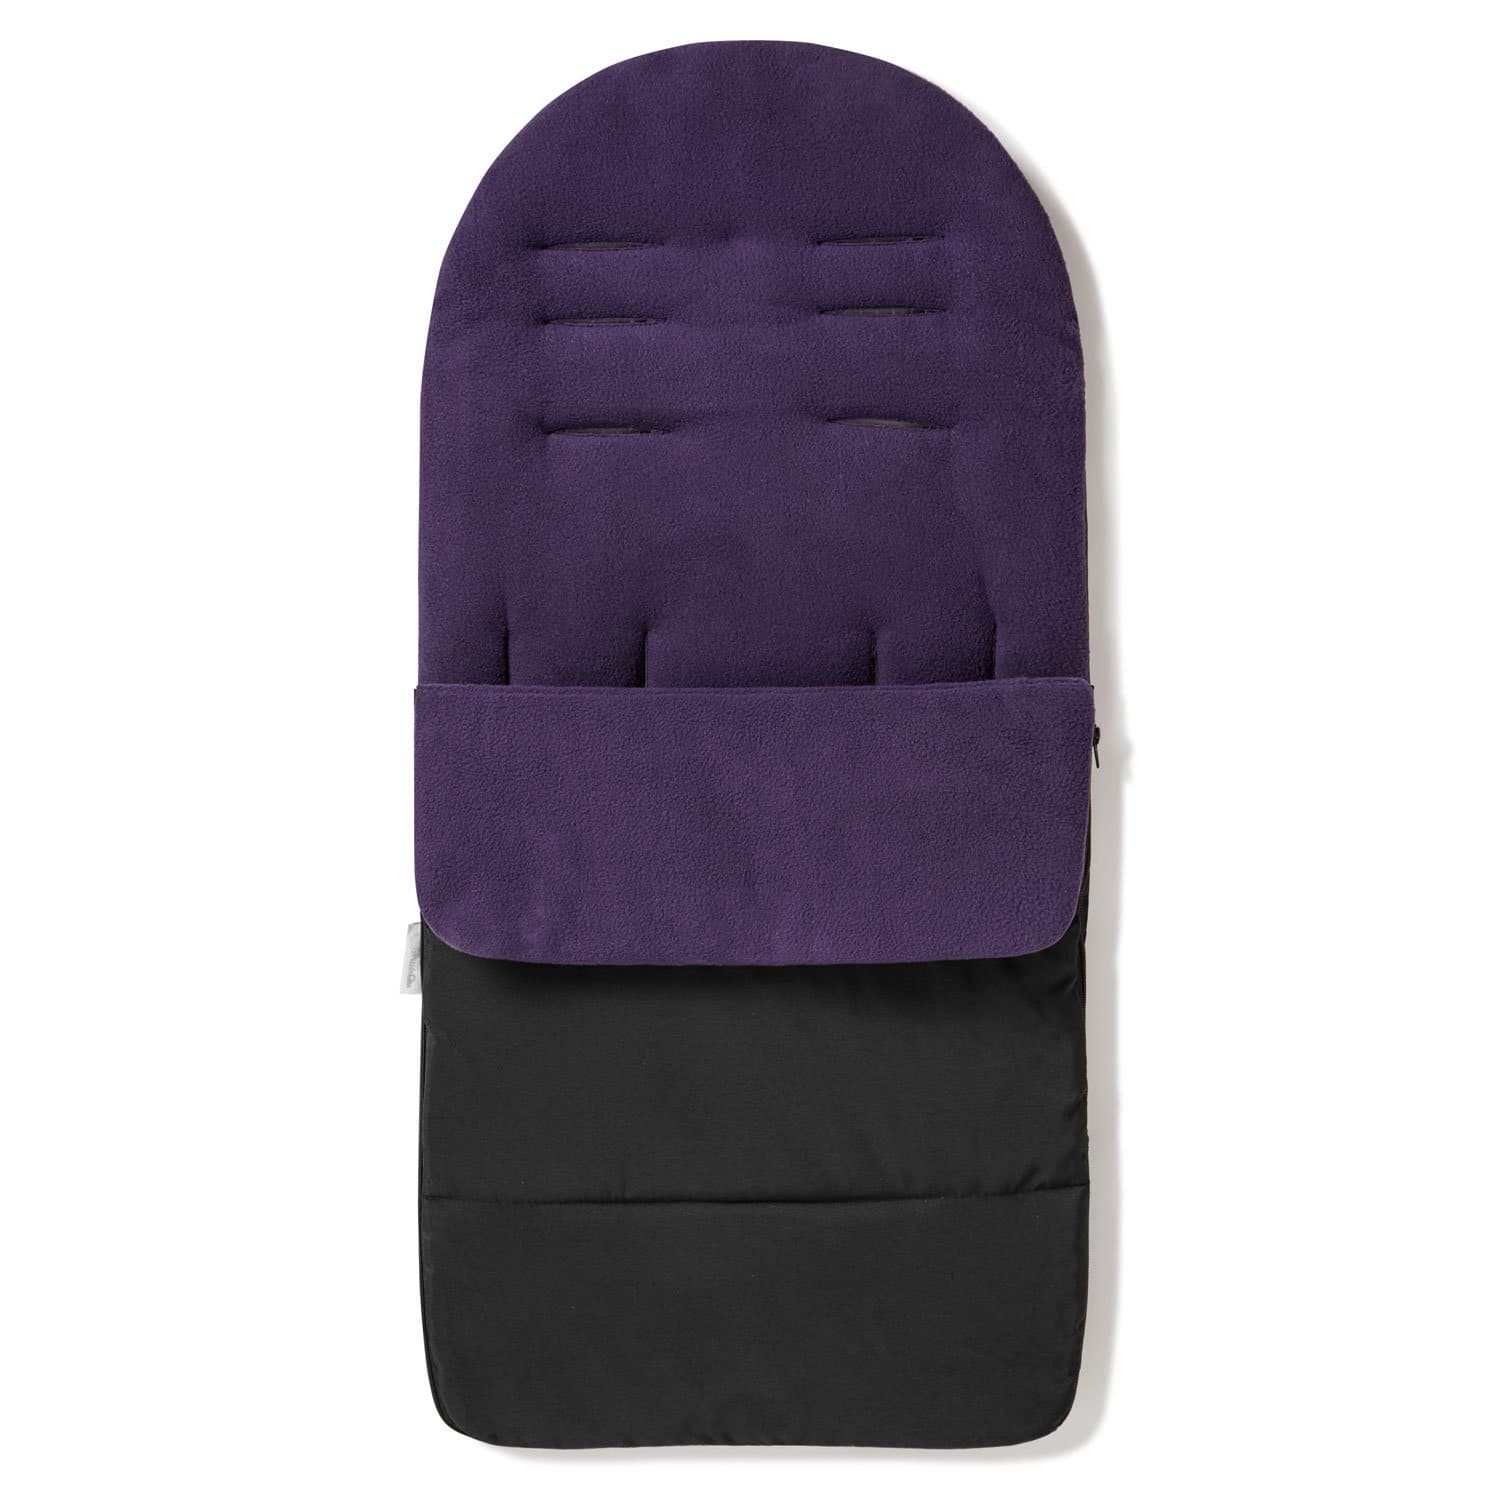 Premium Footmuff / Cosy Toes Compatible with Bloom - Plum Purple / Fits All Models | For Your Little One